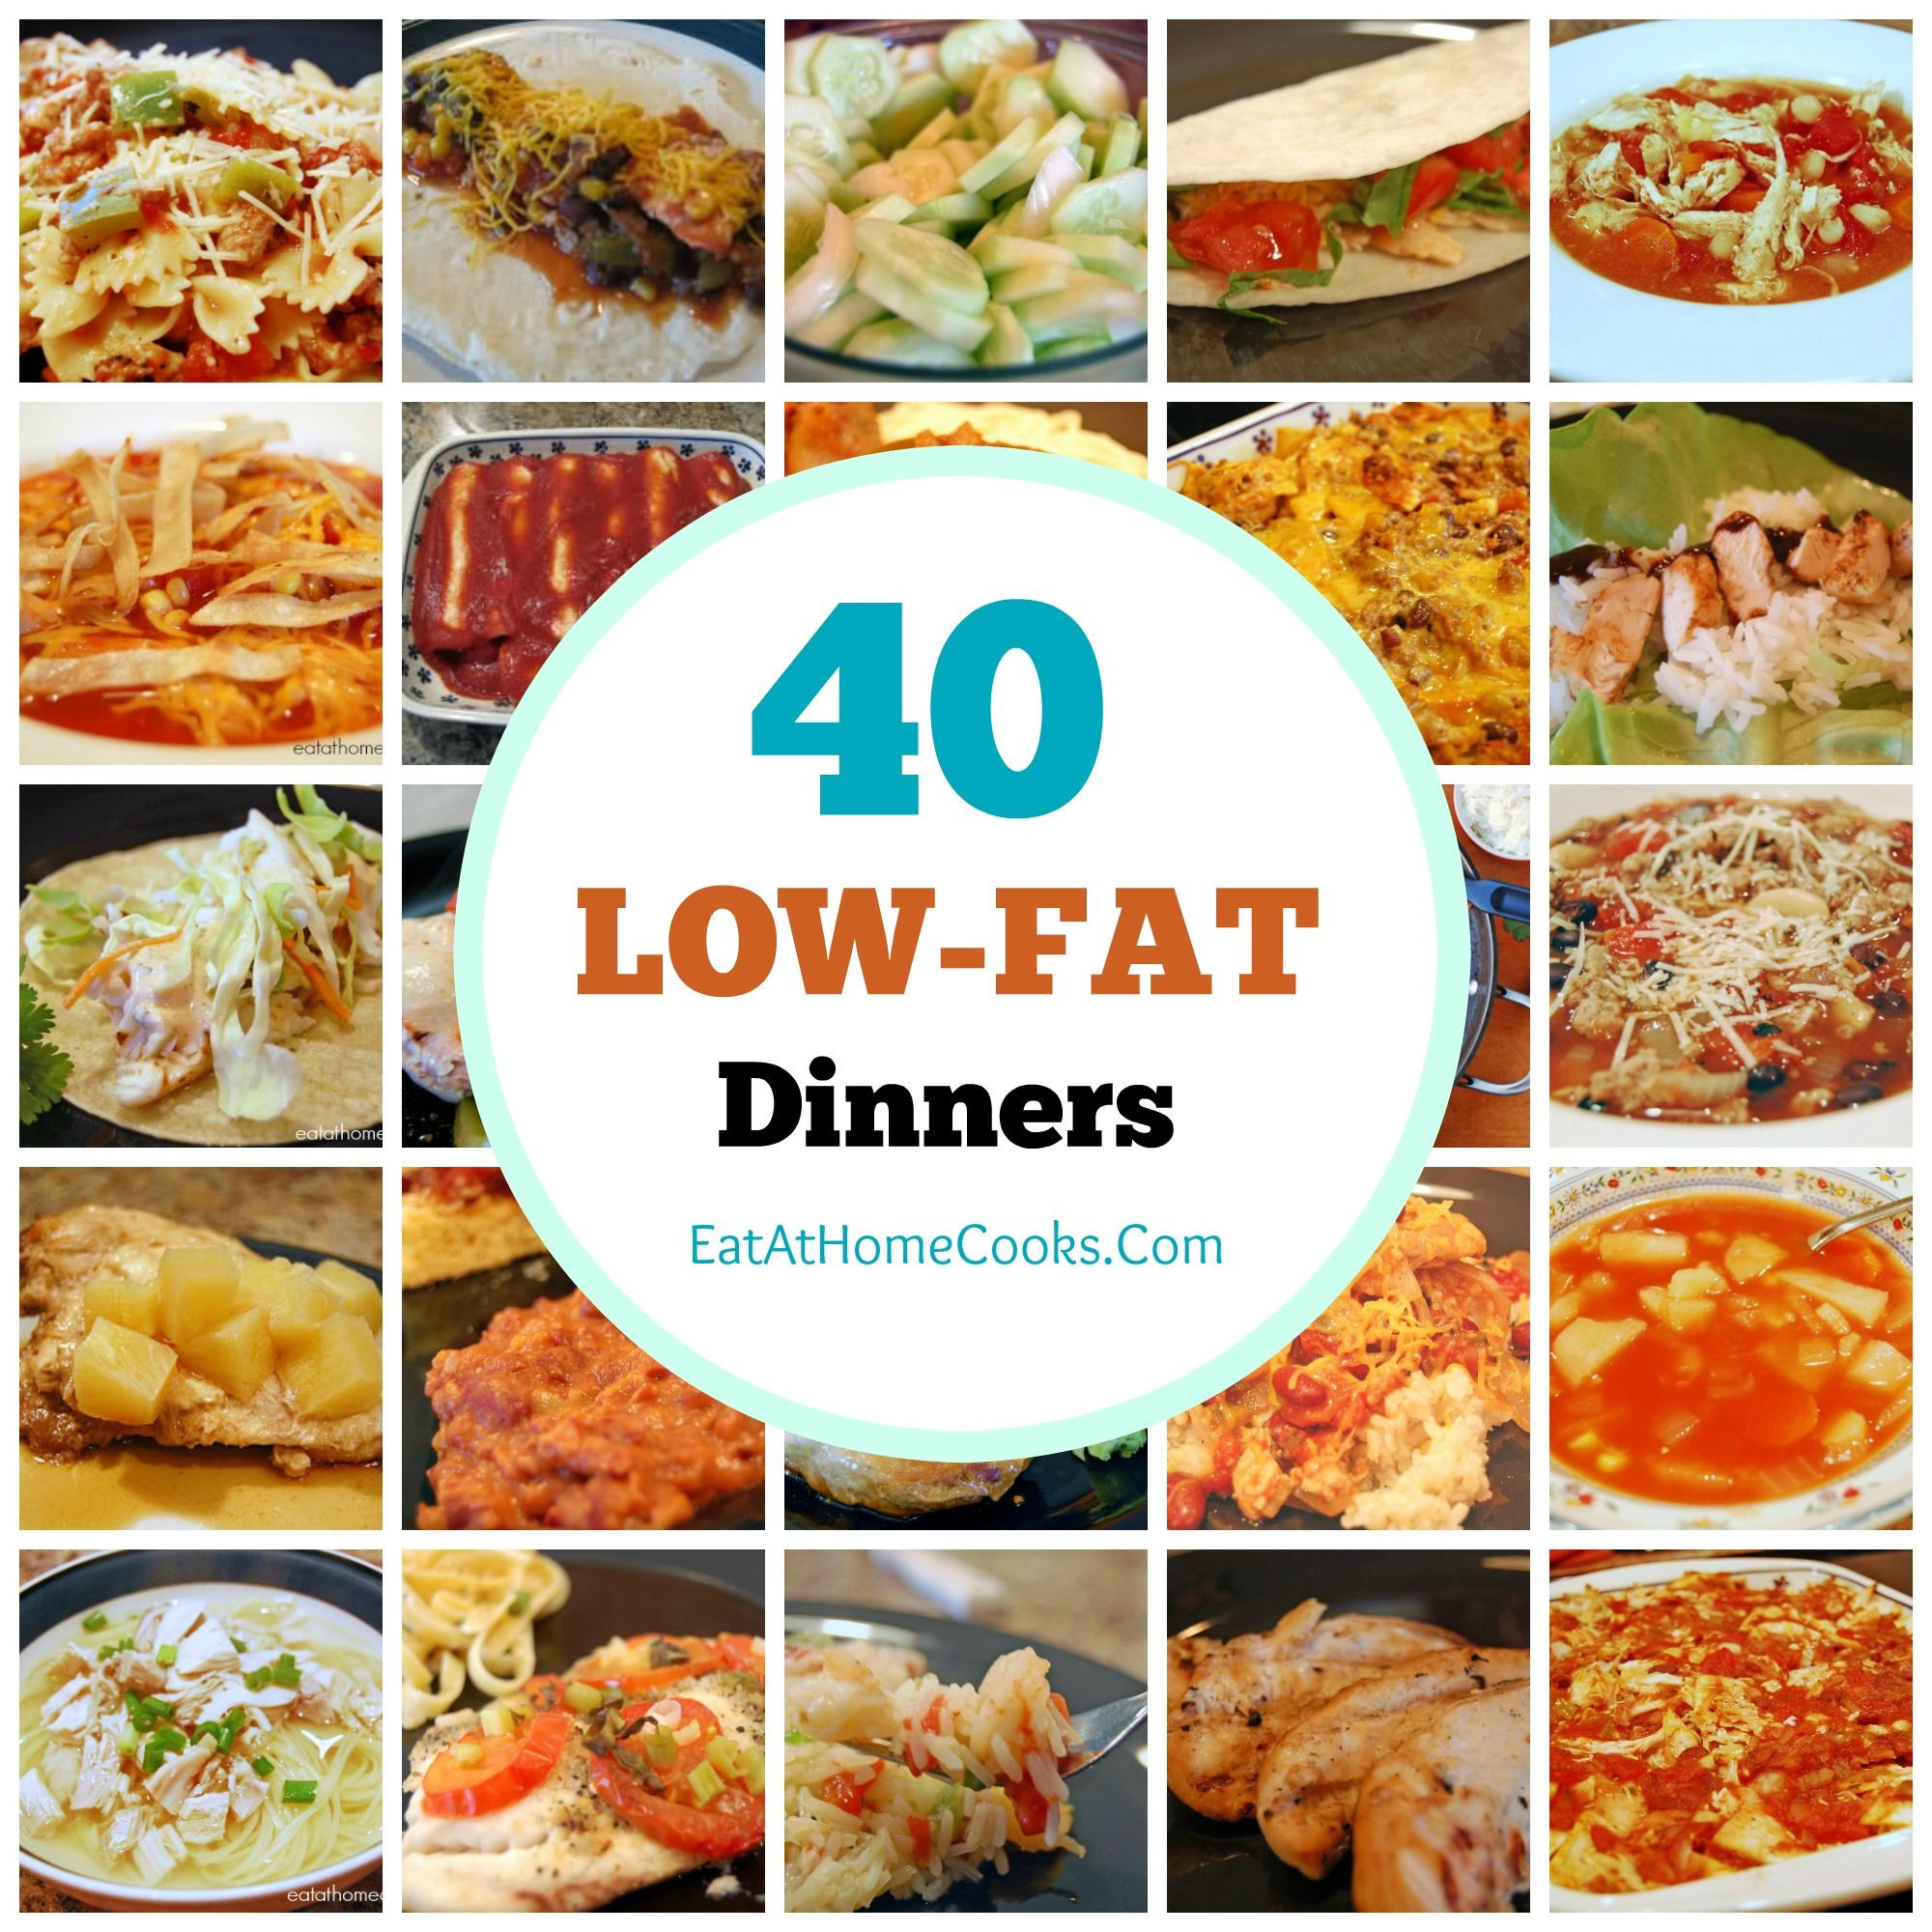 Top 15 Most Shared Low Fat Diet Recipes